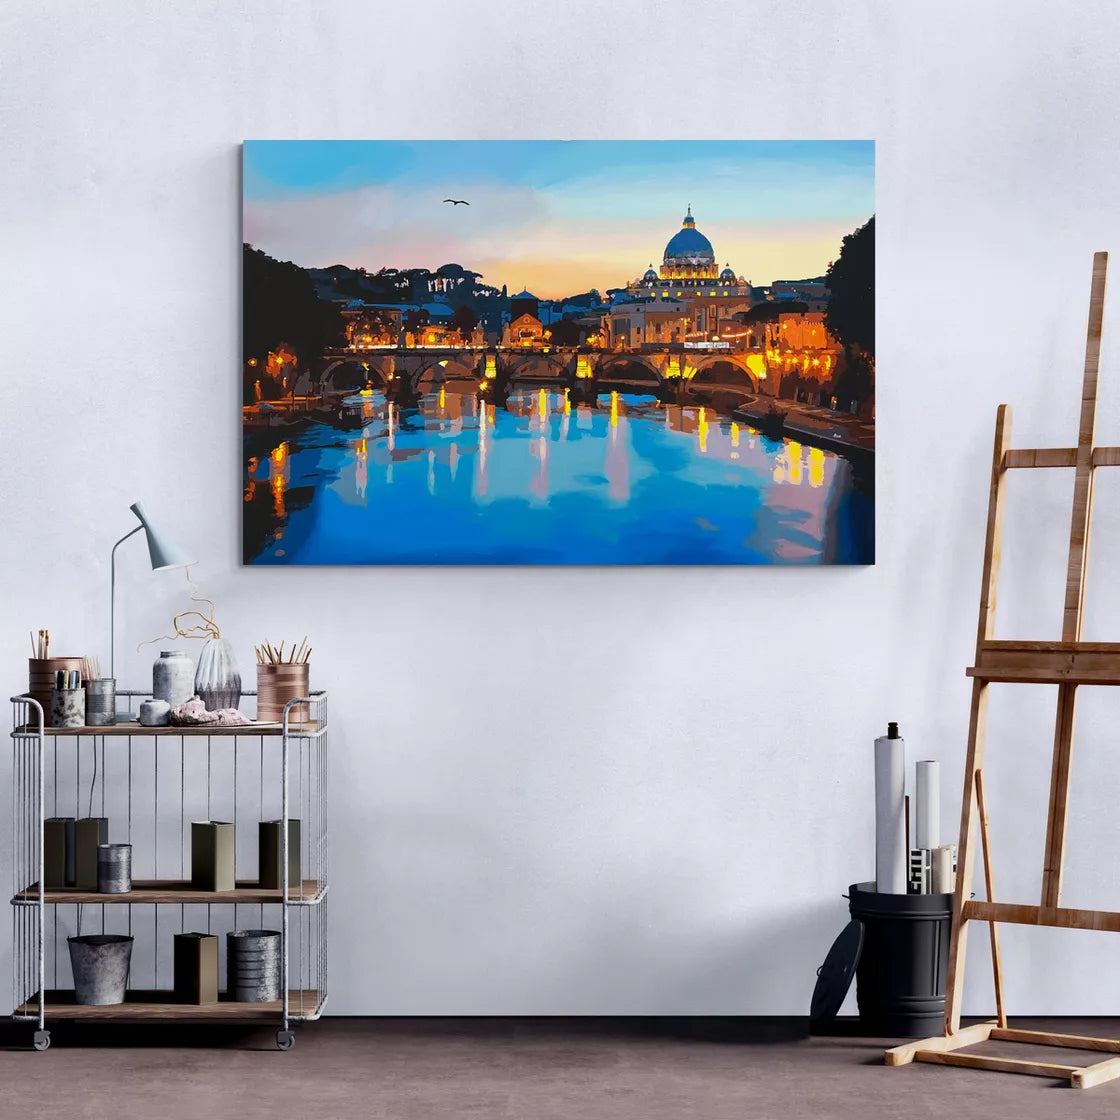 Marco Barberio - 'Rome At Sunset - A View From Ponte Sant'Angelo' - Original Art